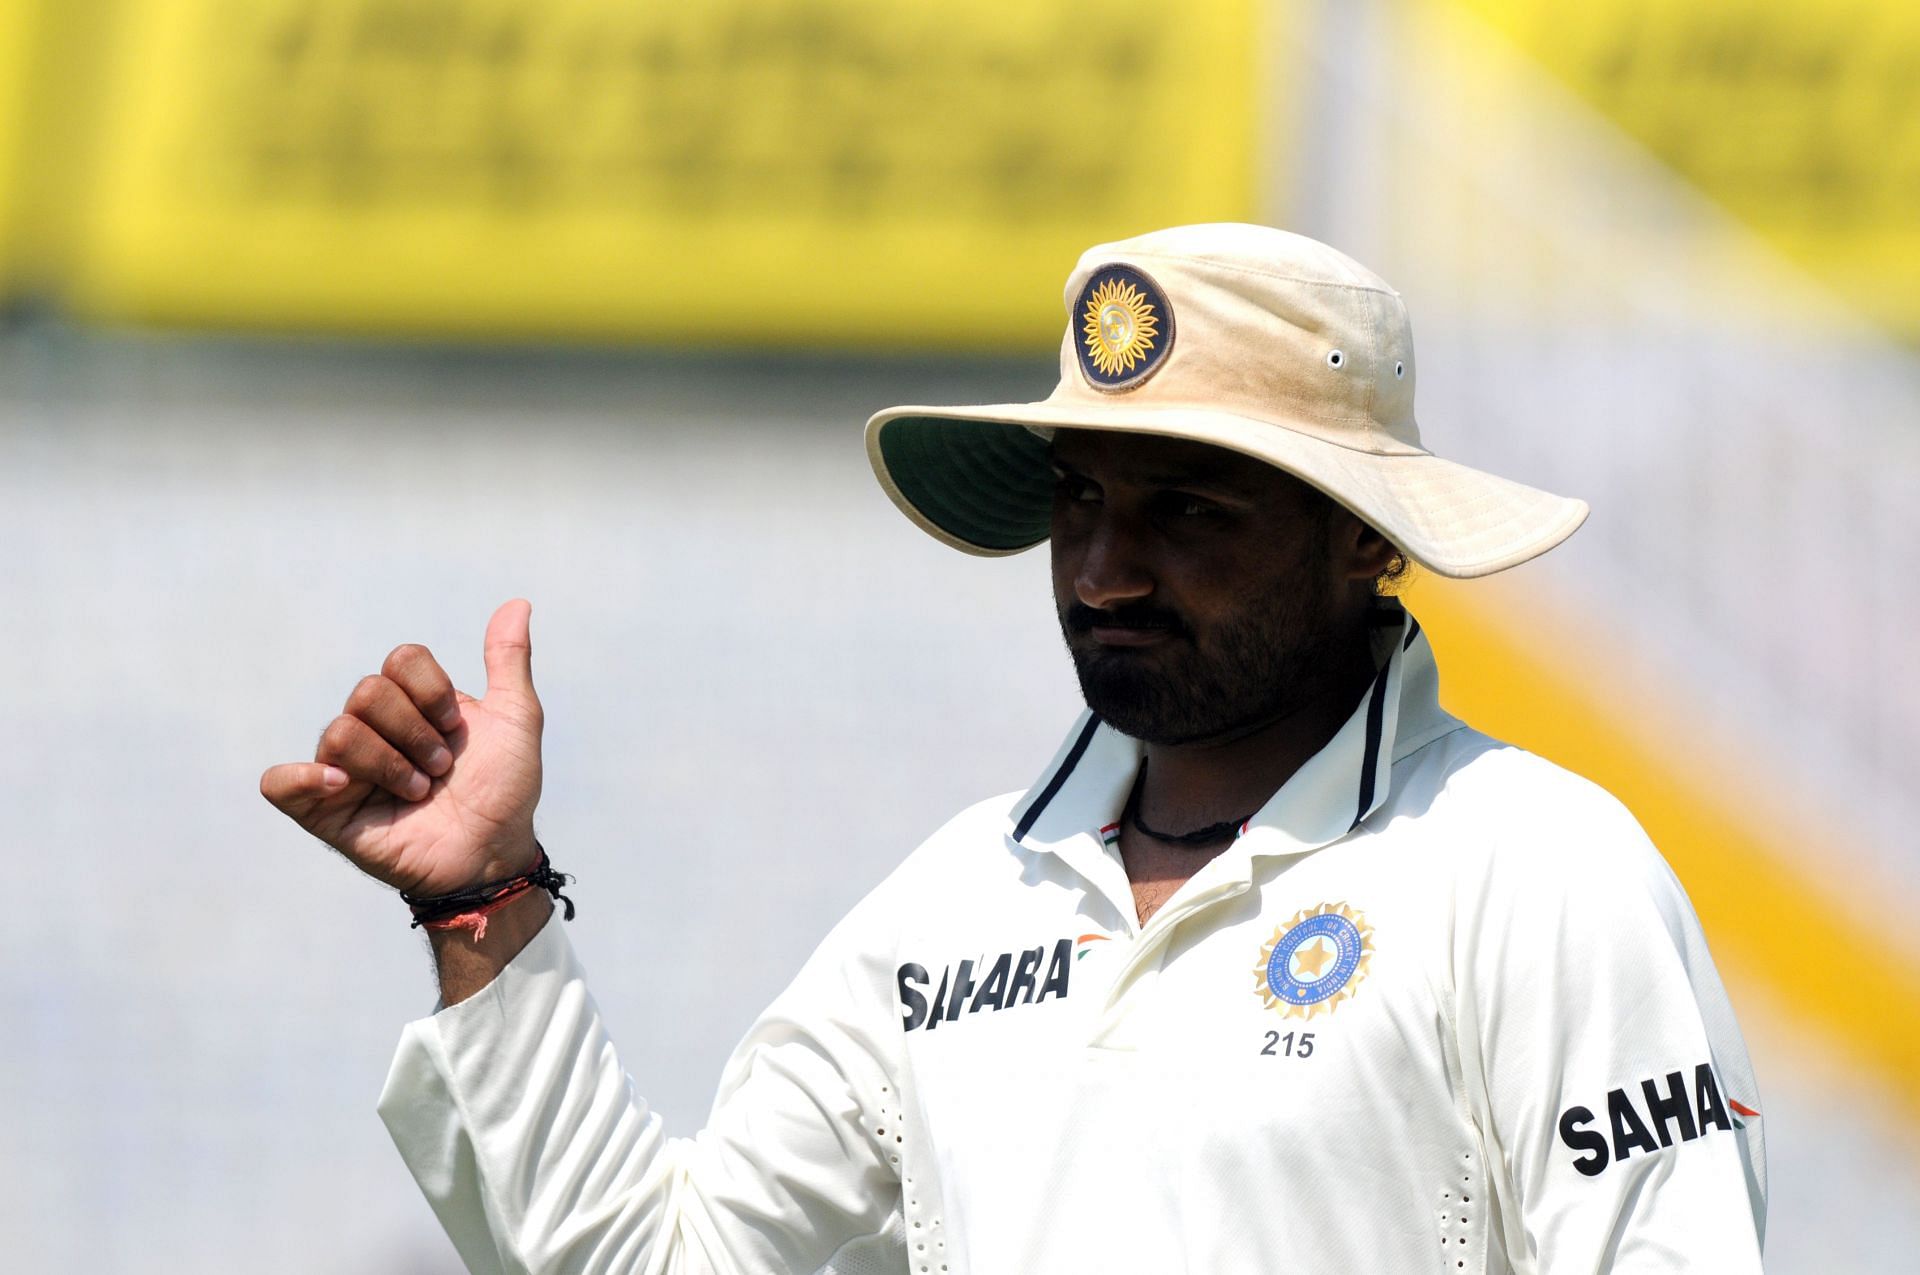 Harbhajan Singh tweeted that he has tested positive for COVID-19.